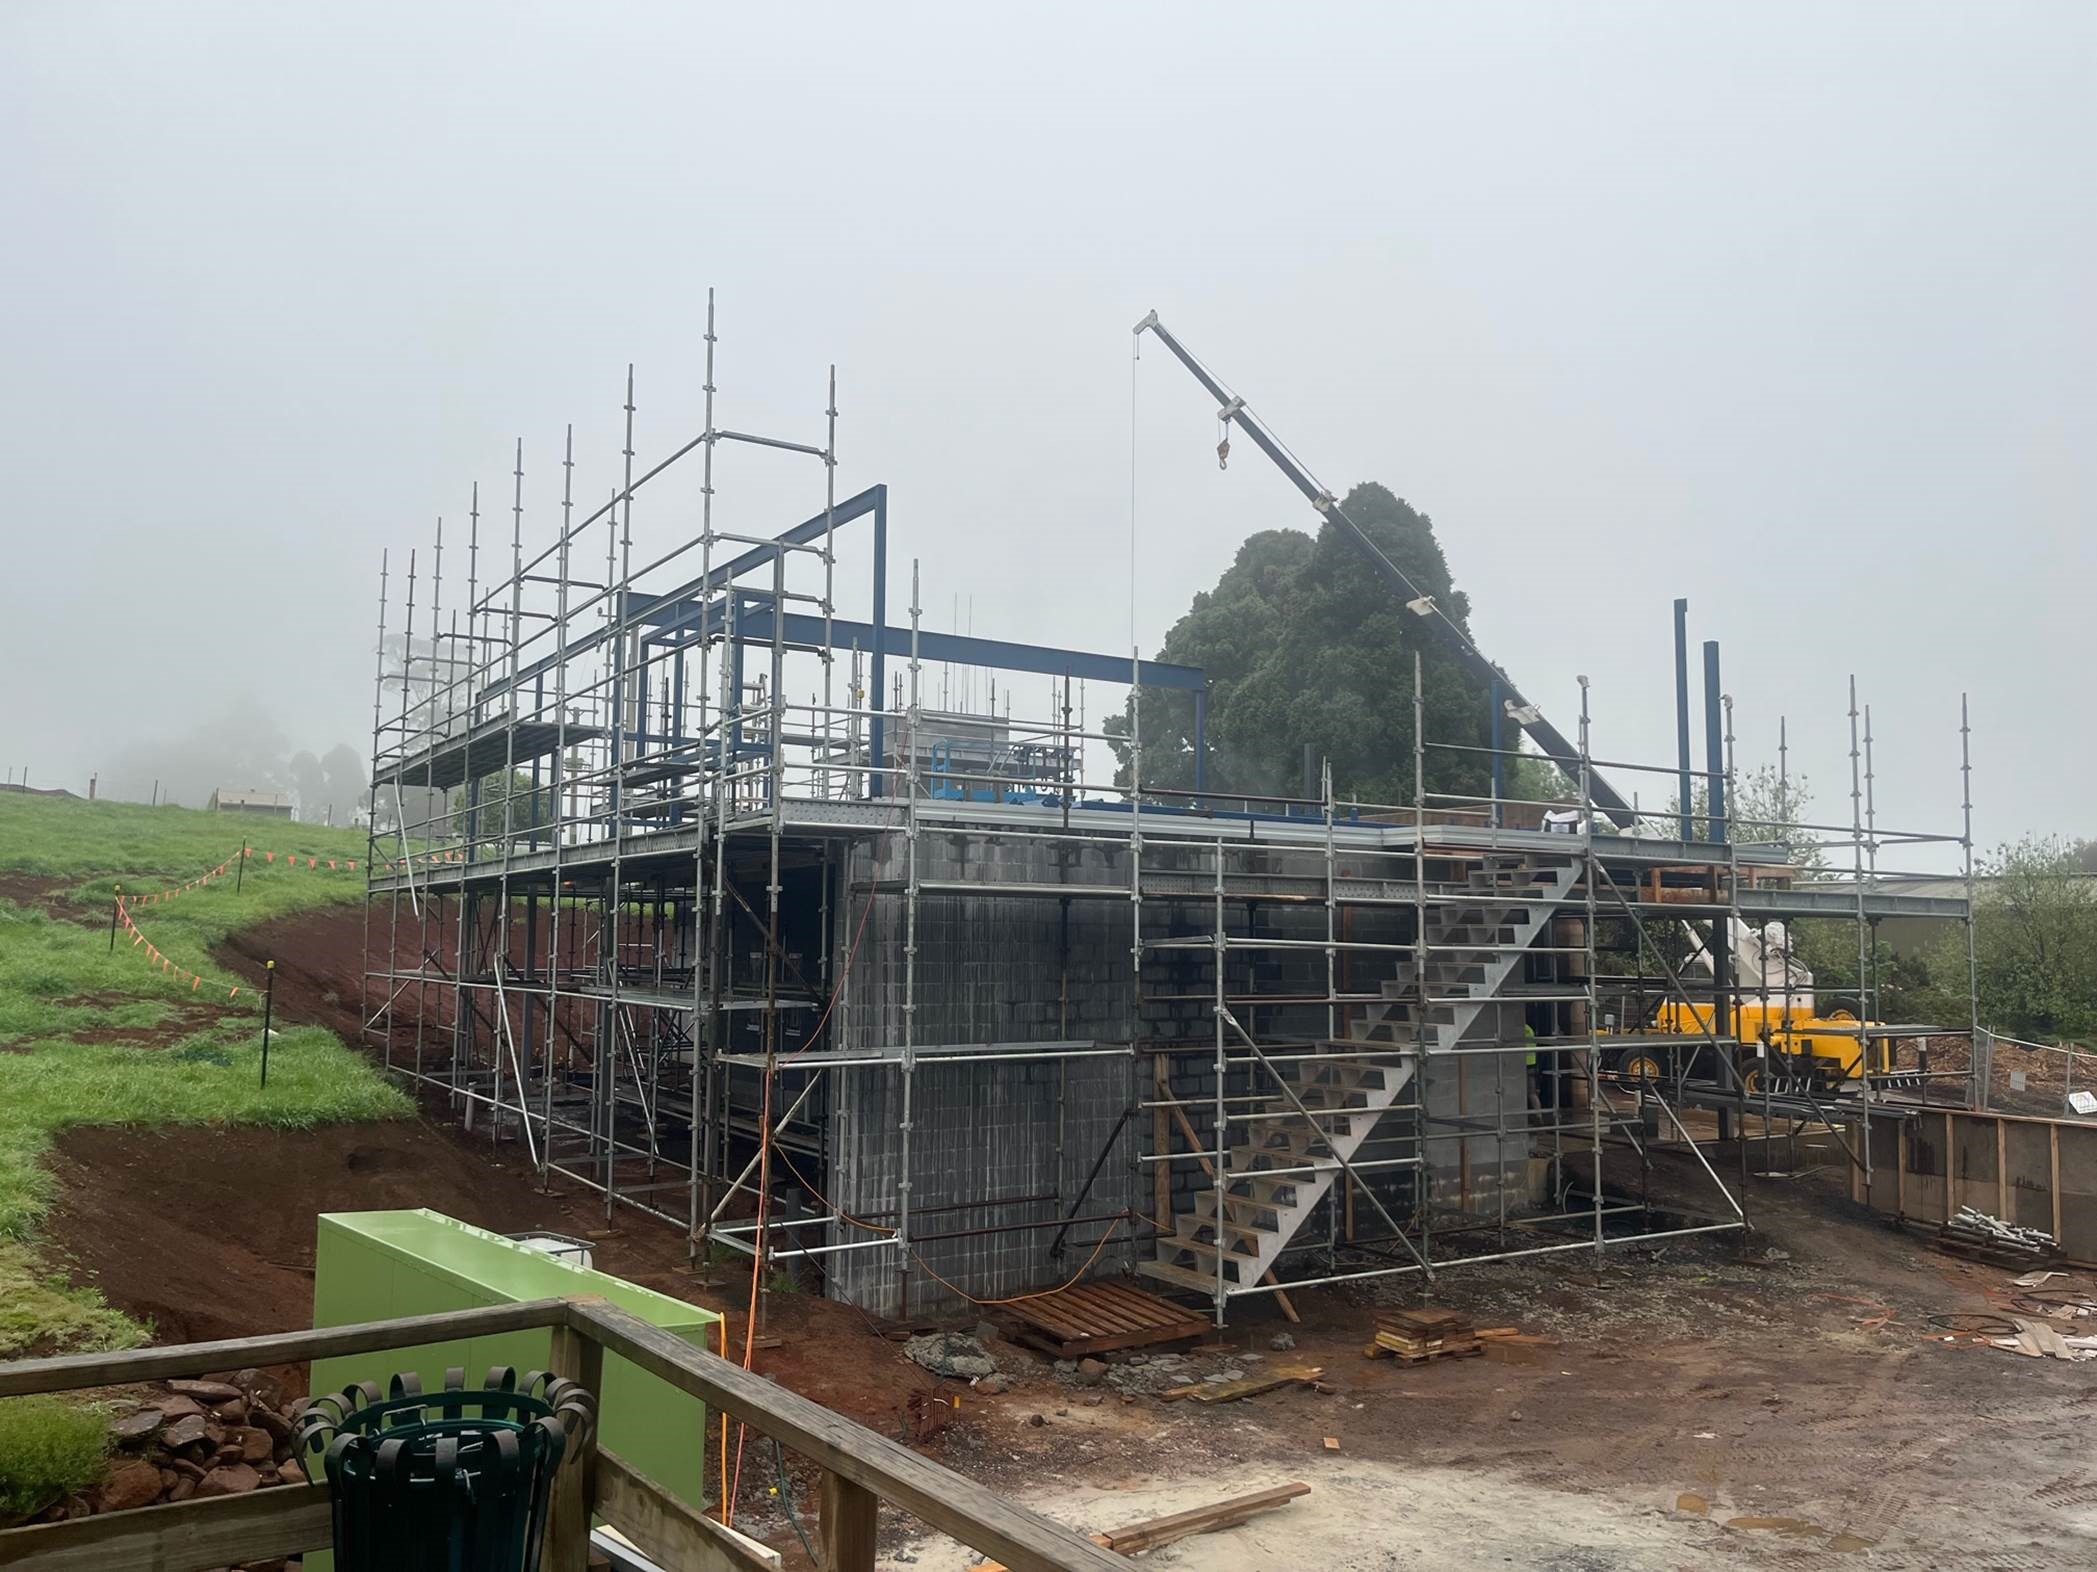 Agriculture centre of exceelence construction site with building and scaffolding around the outsides